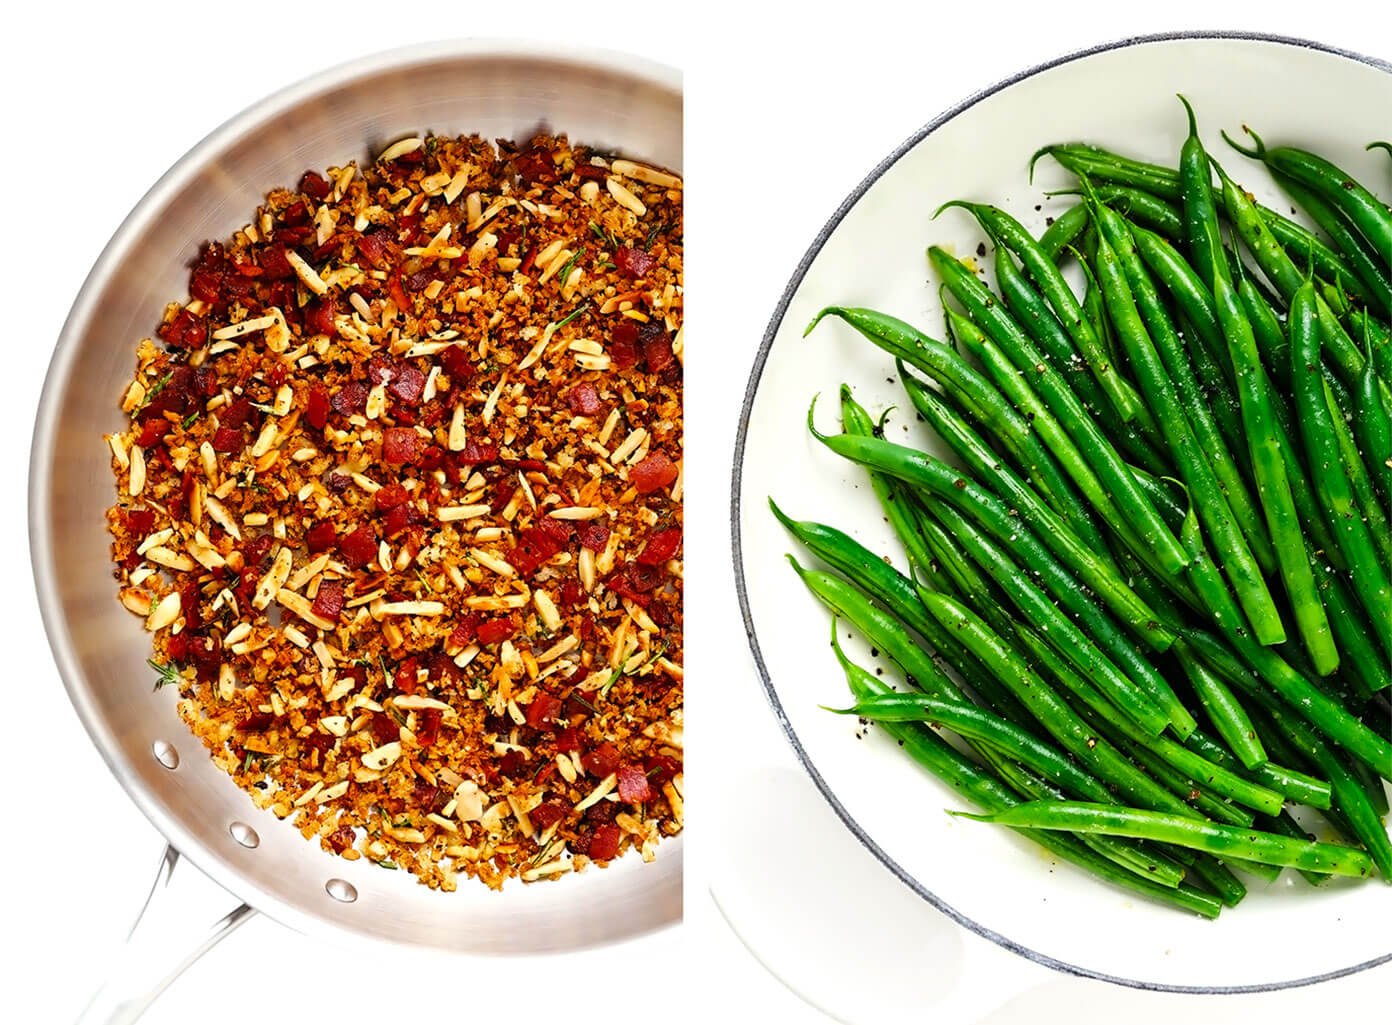 Bacon Breadcrumbs in Saute Pan plus Steamed Green Beans